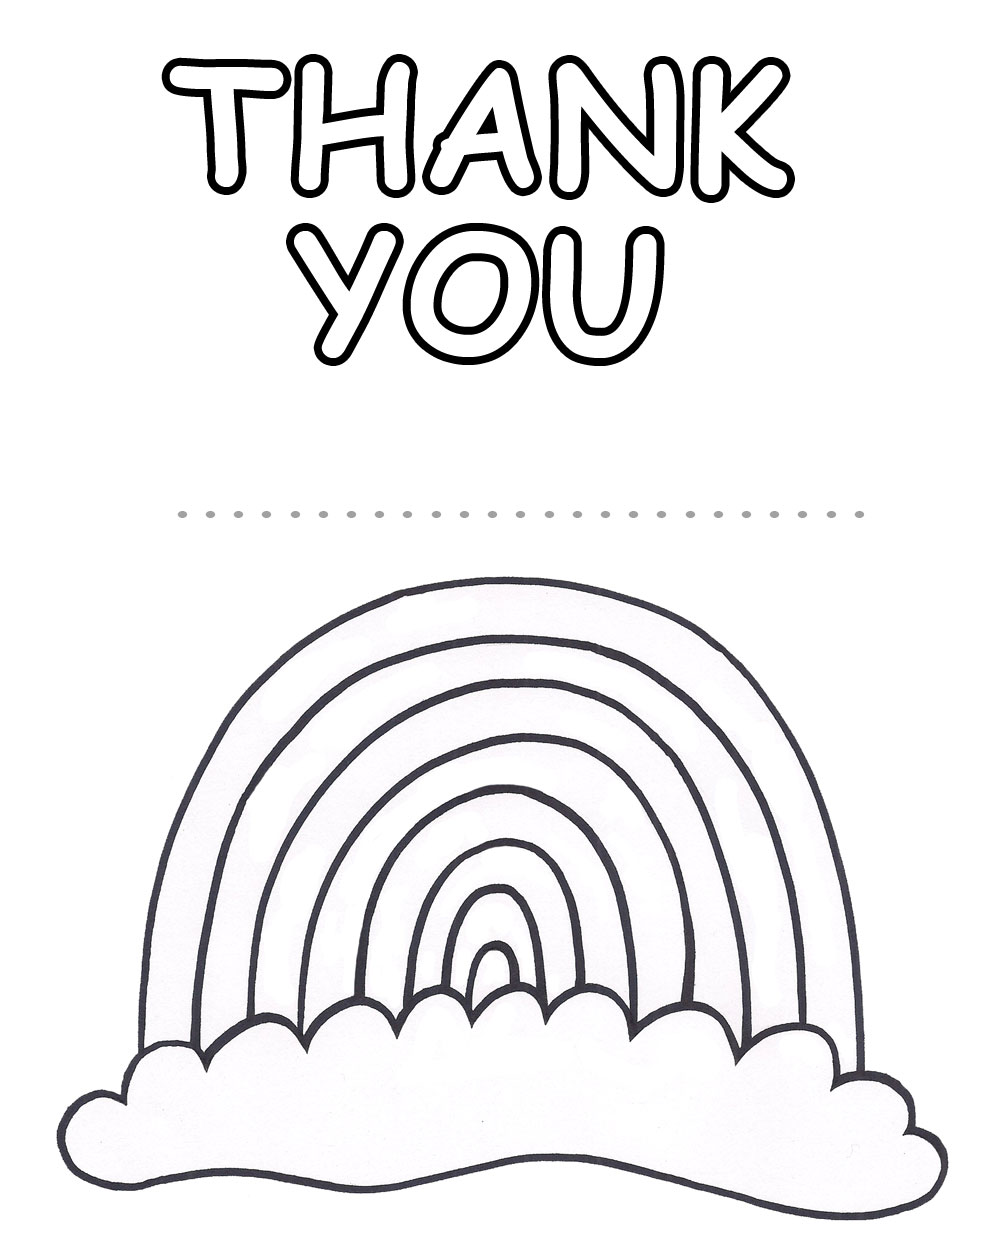 A rainbow poster to colour in to say thank you to whoever you like.